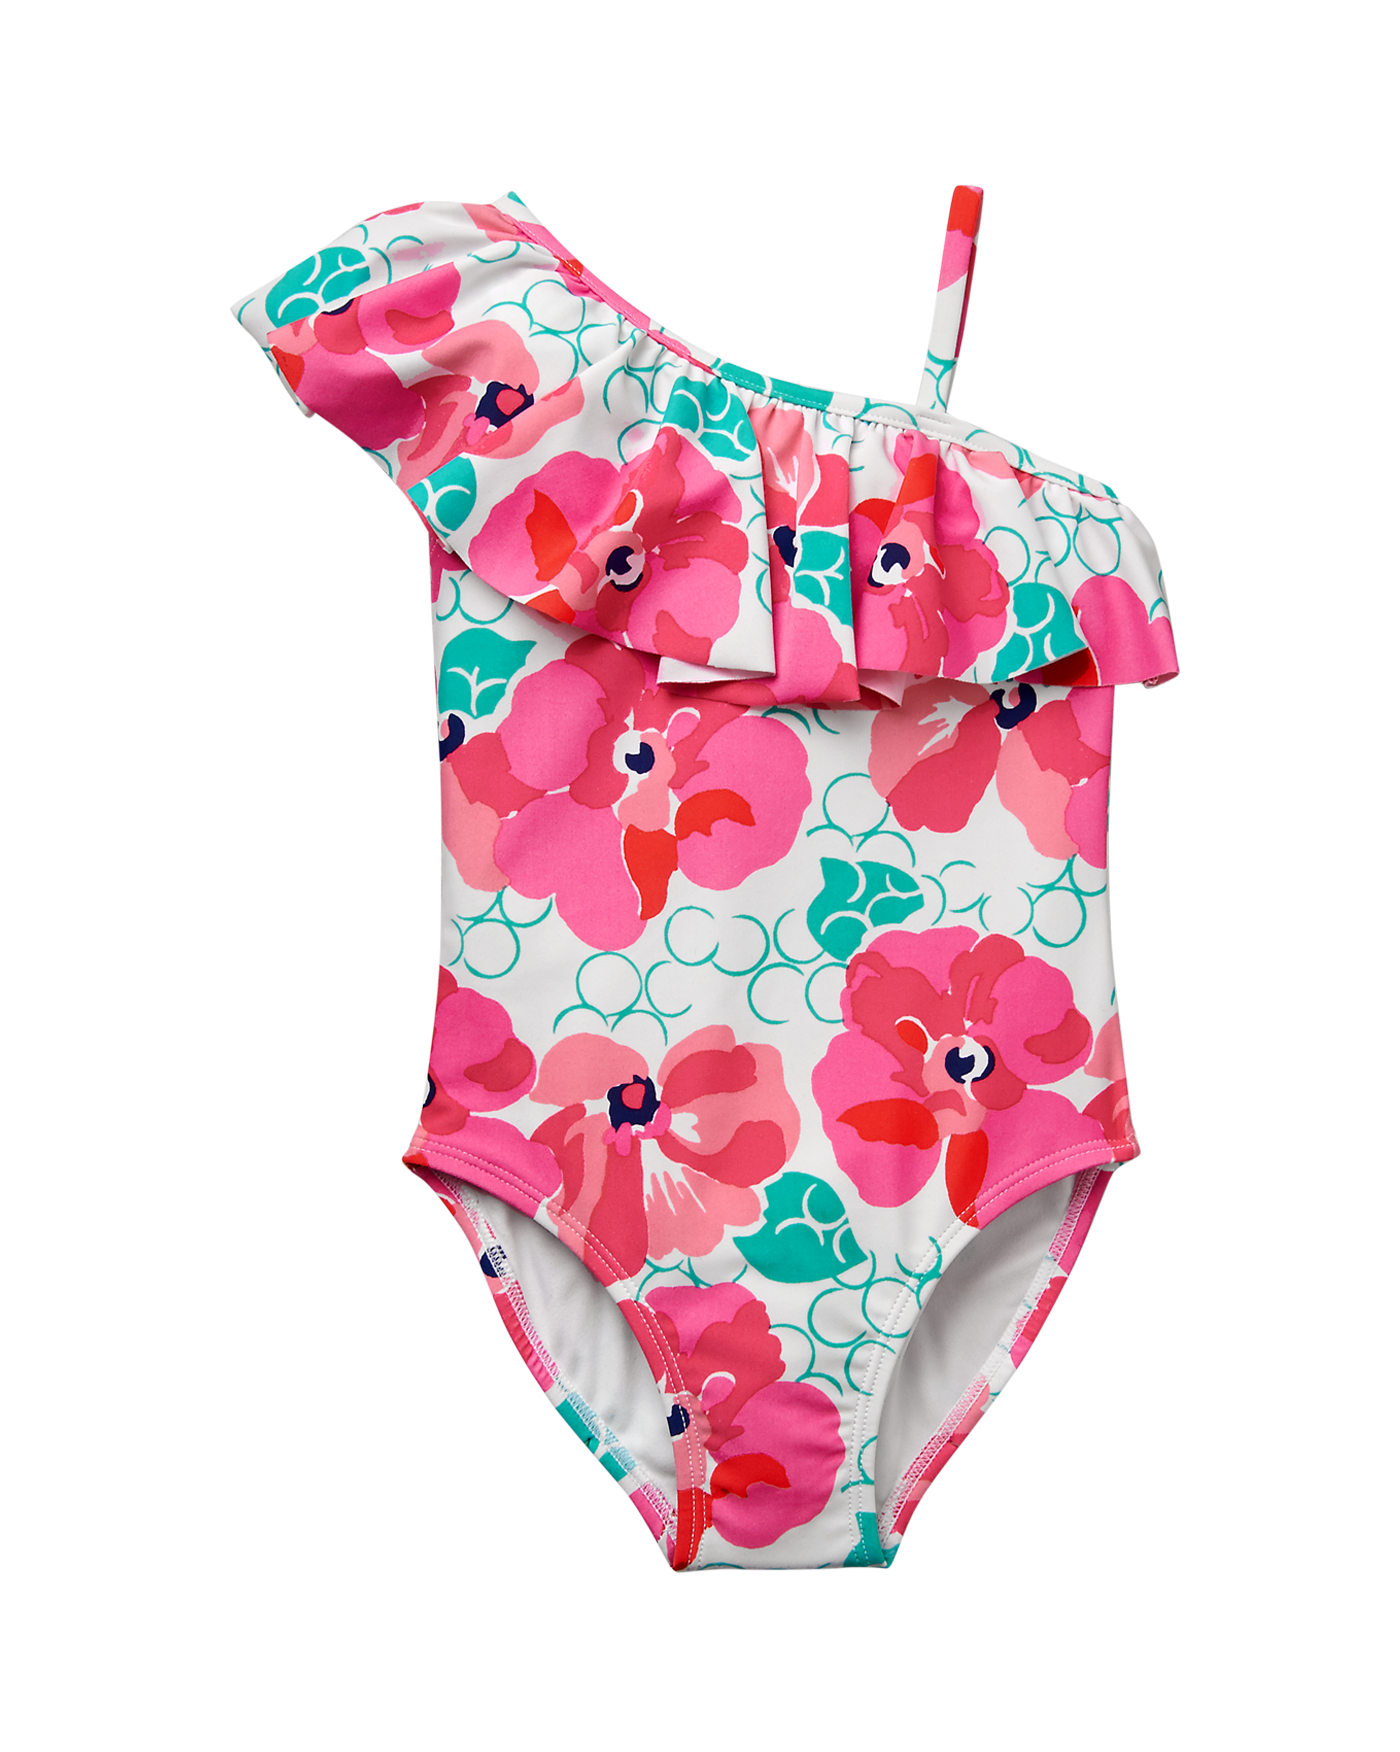 Floral Ruffle Swimsuit image number 0